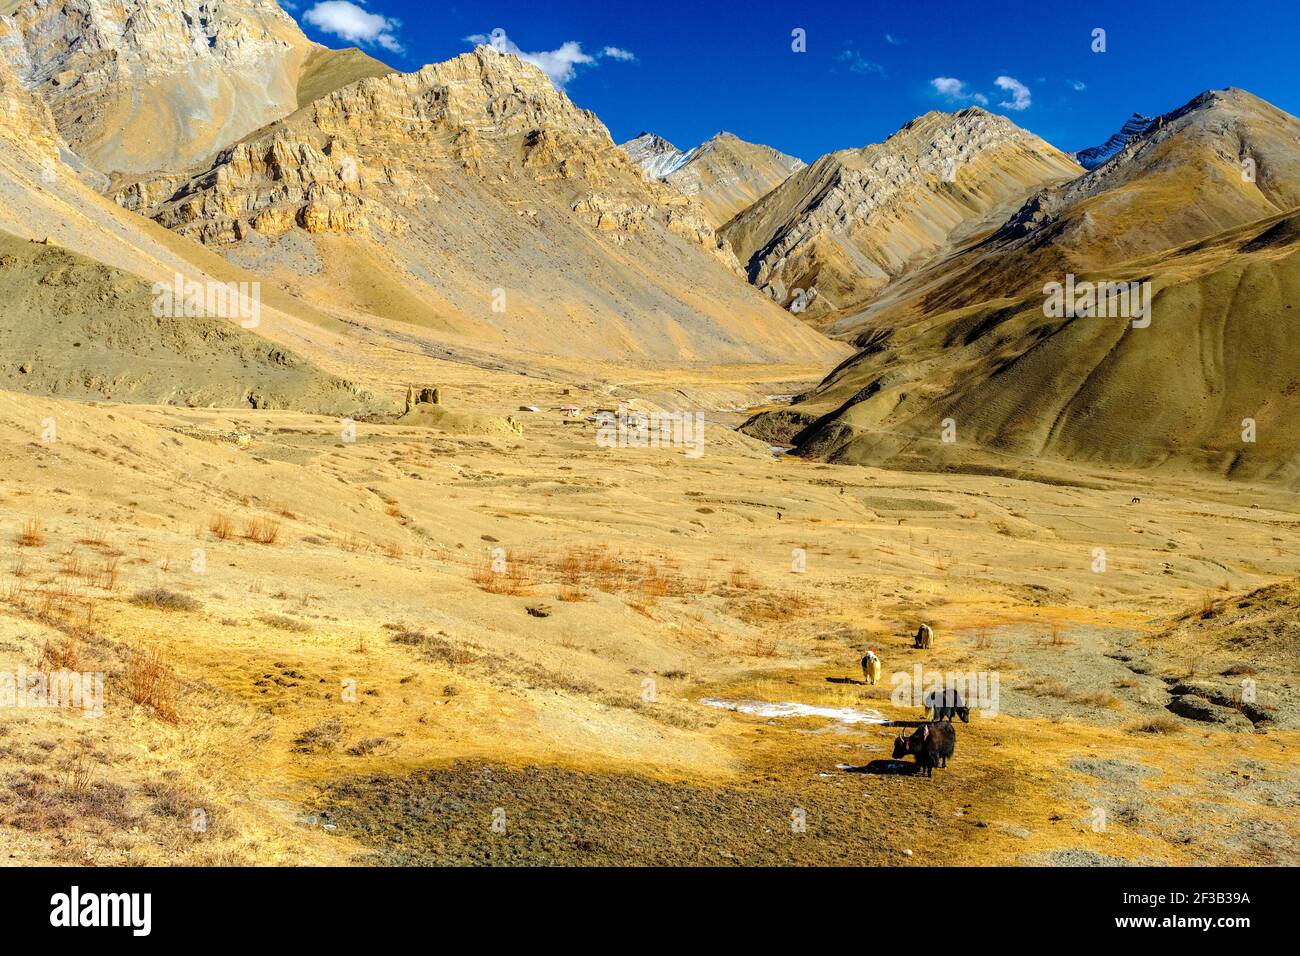 Himalayan scenery reminiscent of Tibet in the Nepalese region of Dolpo Stock Photo